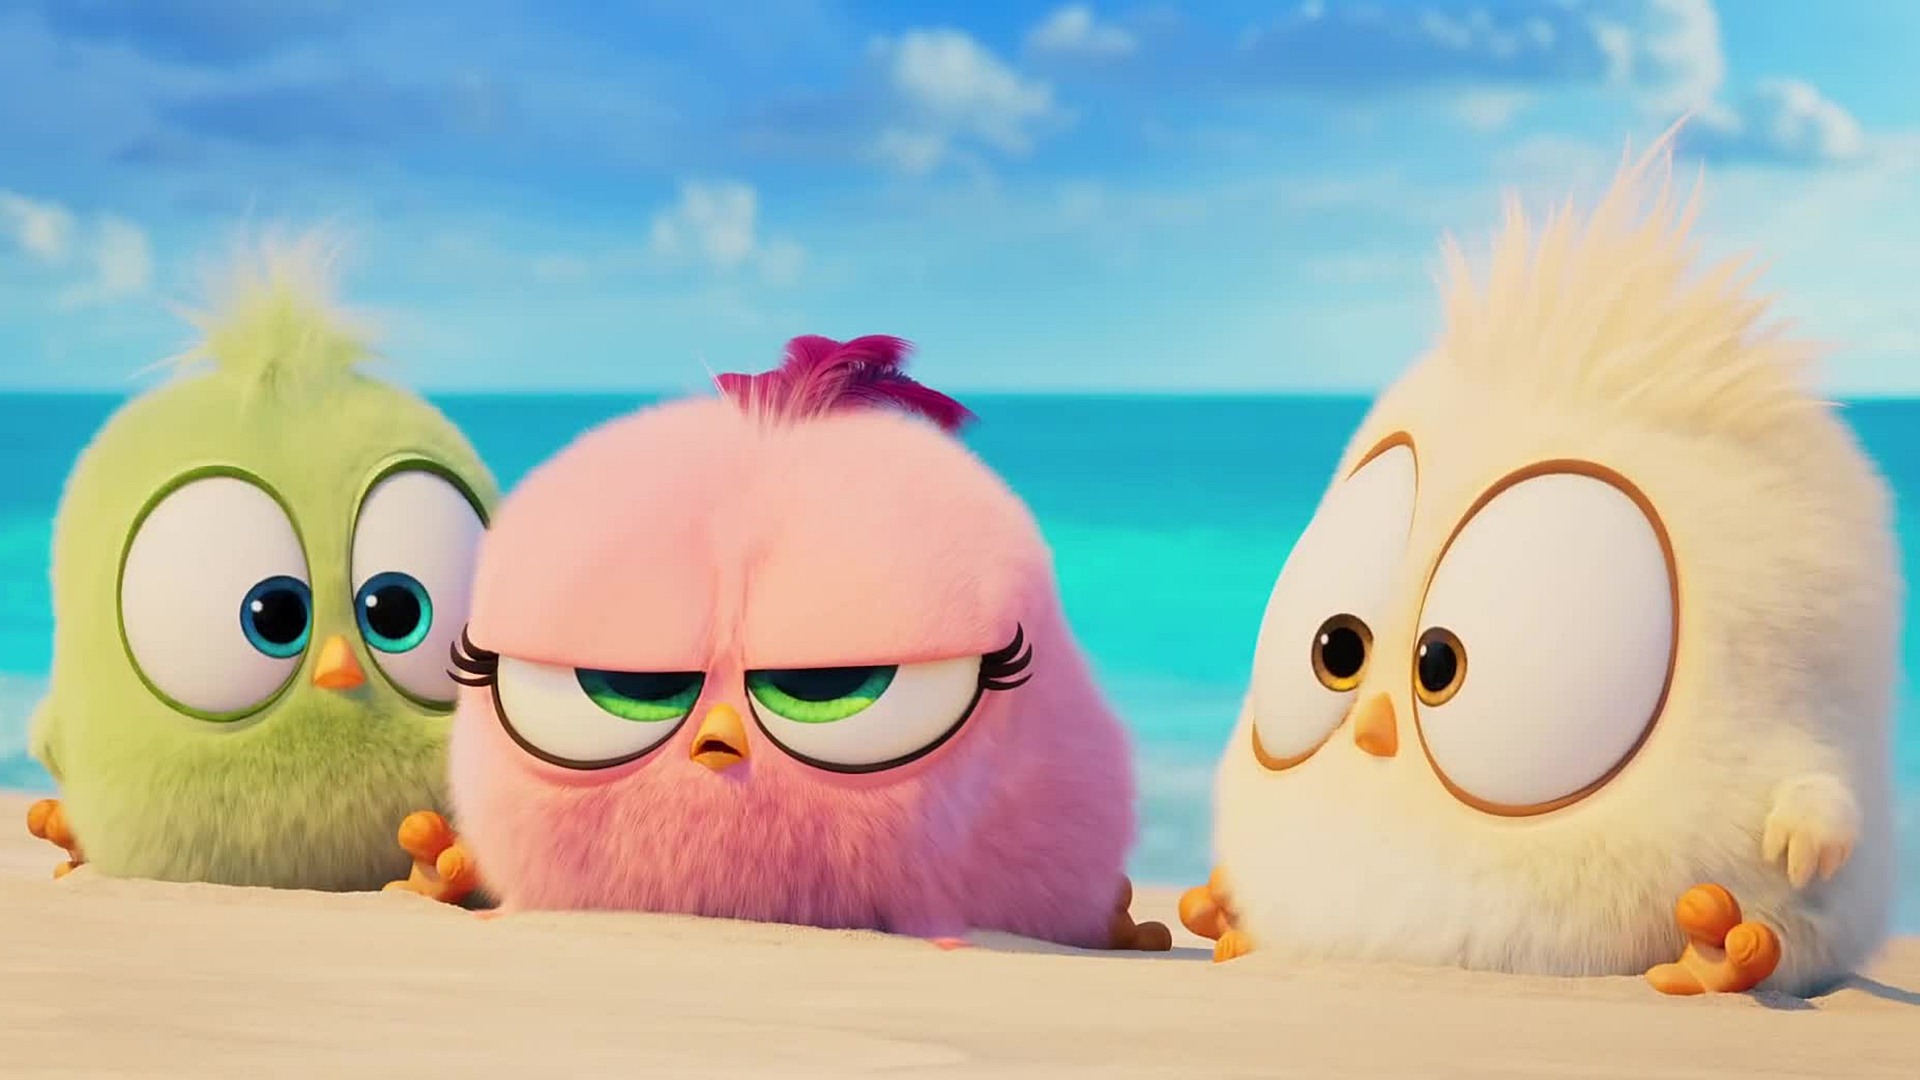 The Angry Birds Movie 2 Hd Wallpaper - Angry Birds Gif - HD Wallpaper 